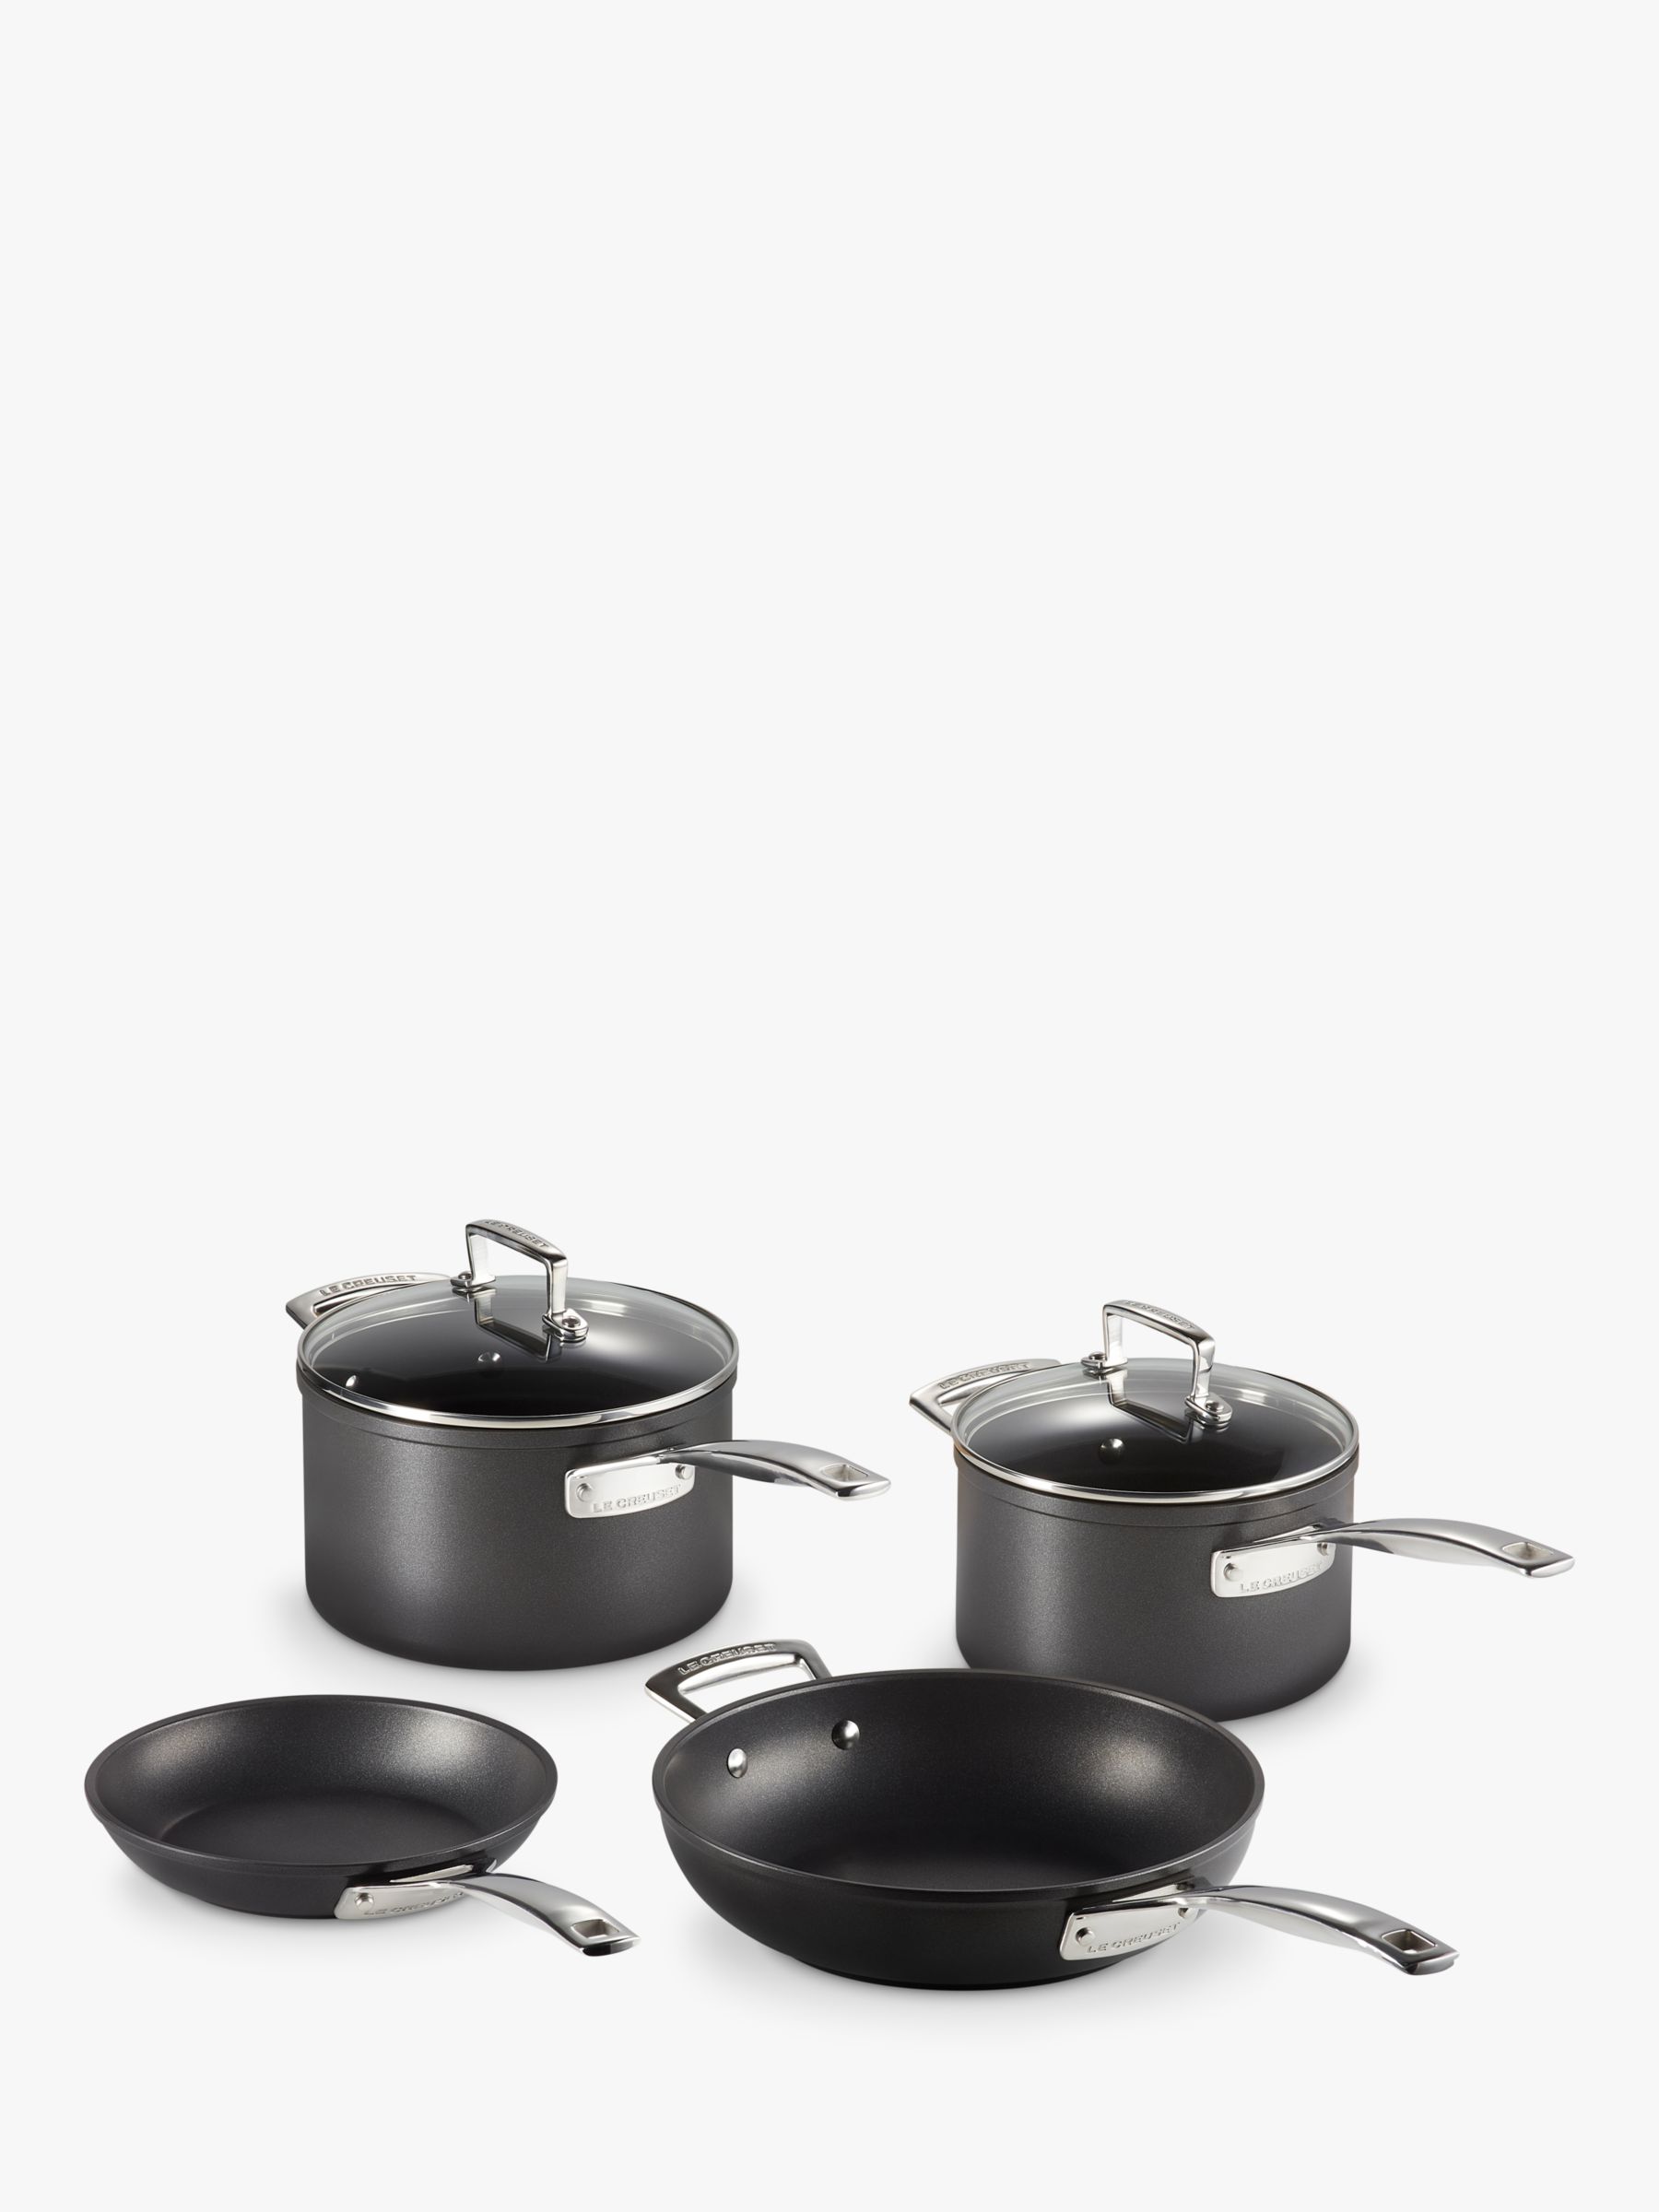 SHINEURI 3 Pieces Removable Handle Cookware, Stackable Pots And Pans Set,  Nonstick Pot and Pan Set,Nonstick Frying Pans for Home & Camping,  Dishwasher